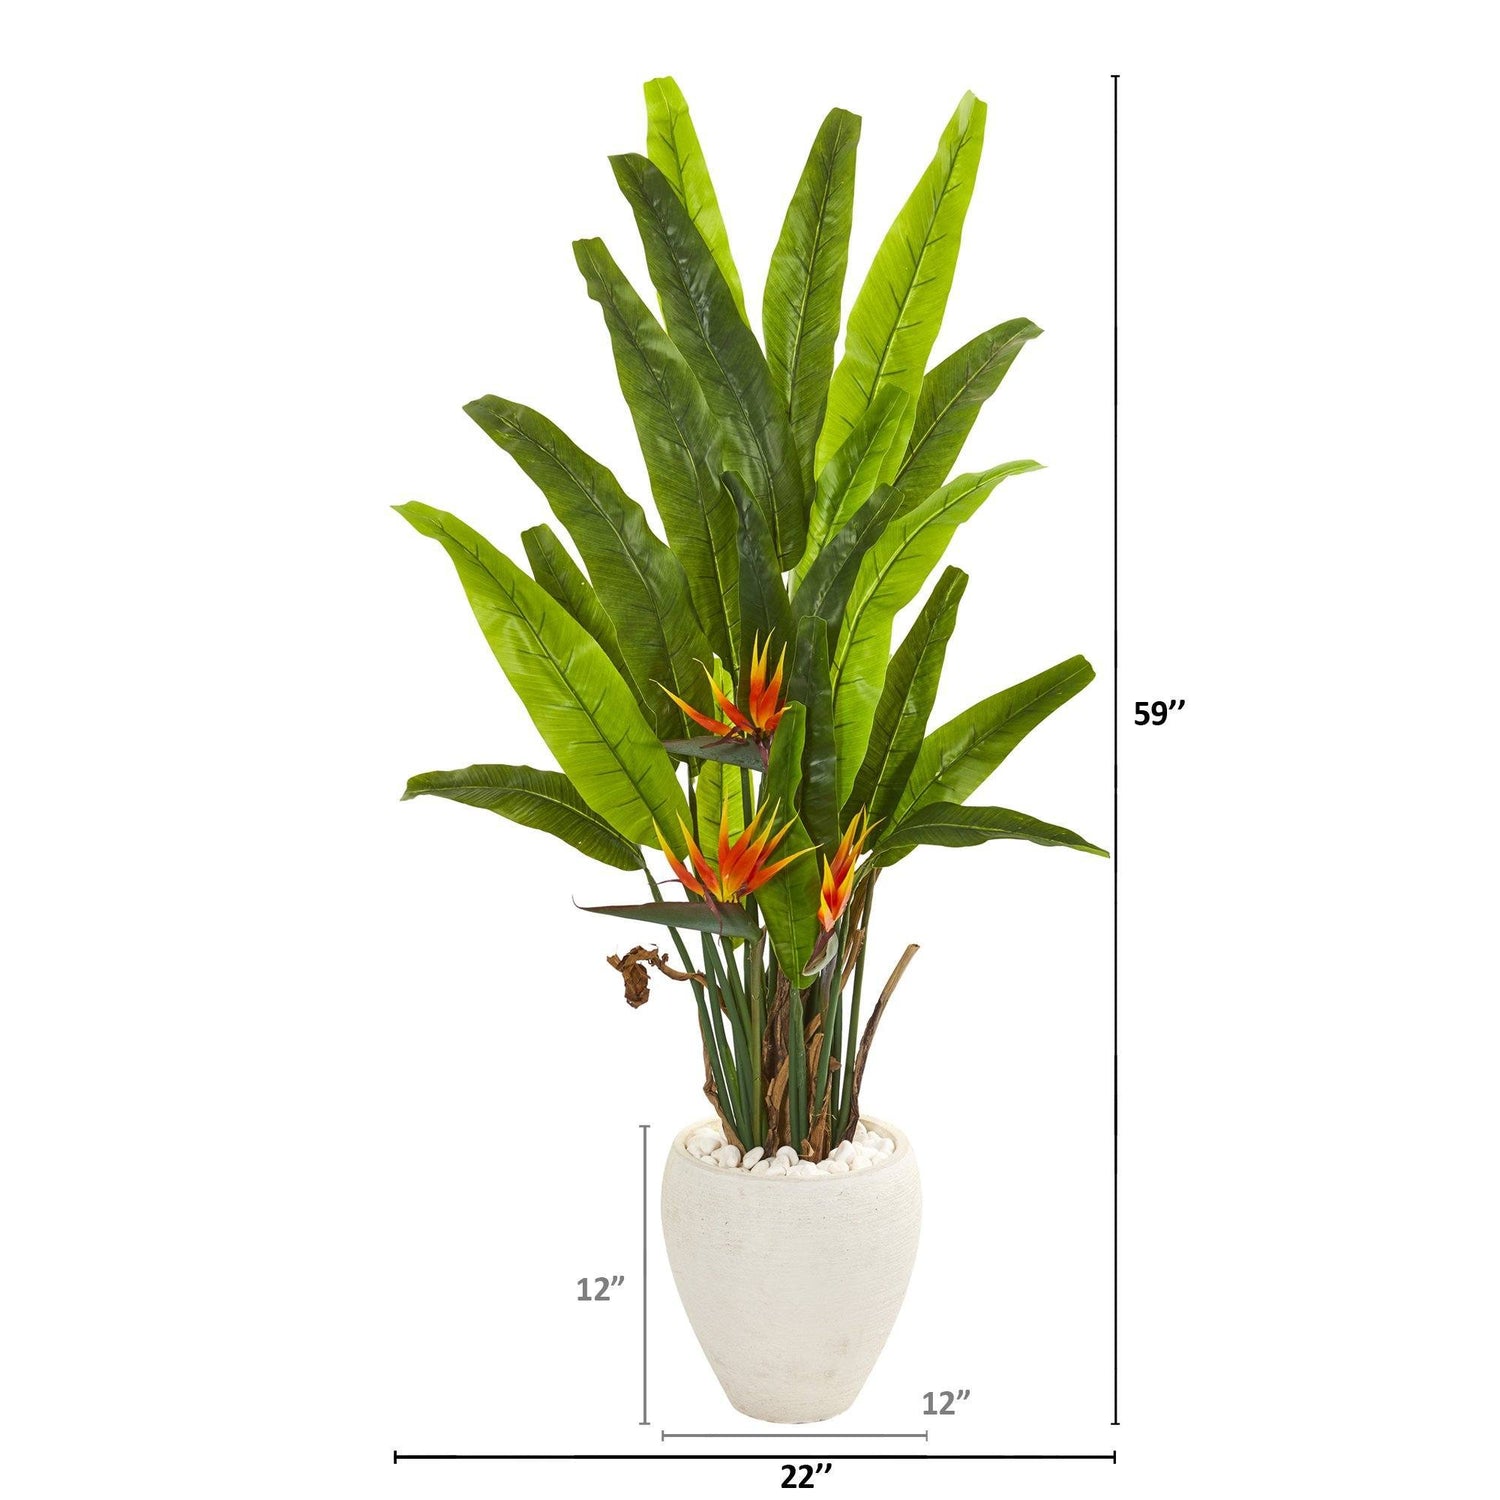 59” Bird of Paradise Artificial Plant in White Planter